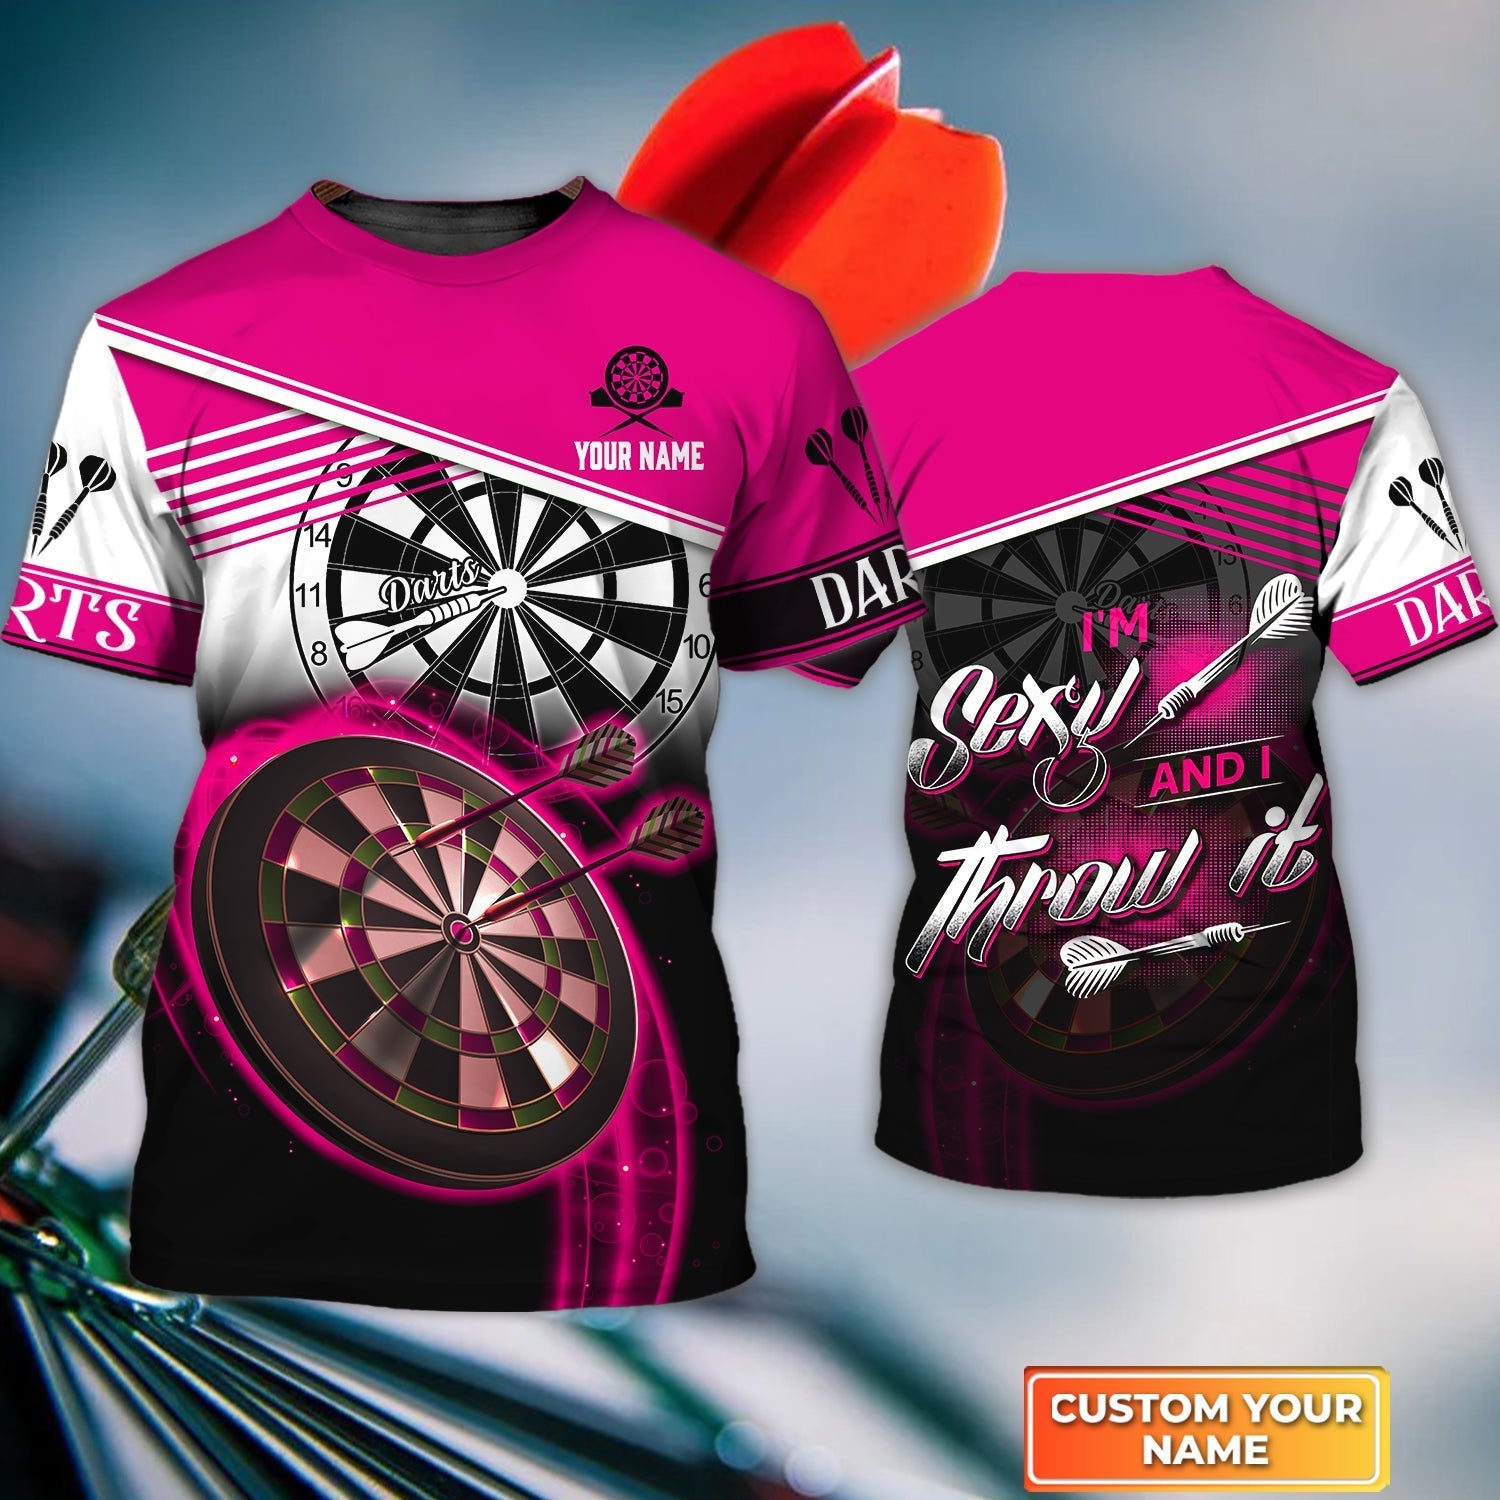 Personalized Darts T-Shirt, Darts Pink Color Custom Name Shirt I'm Sexy And I Throw It, Outfits For Darts Players, Darts Team